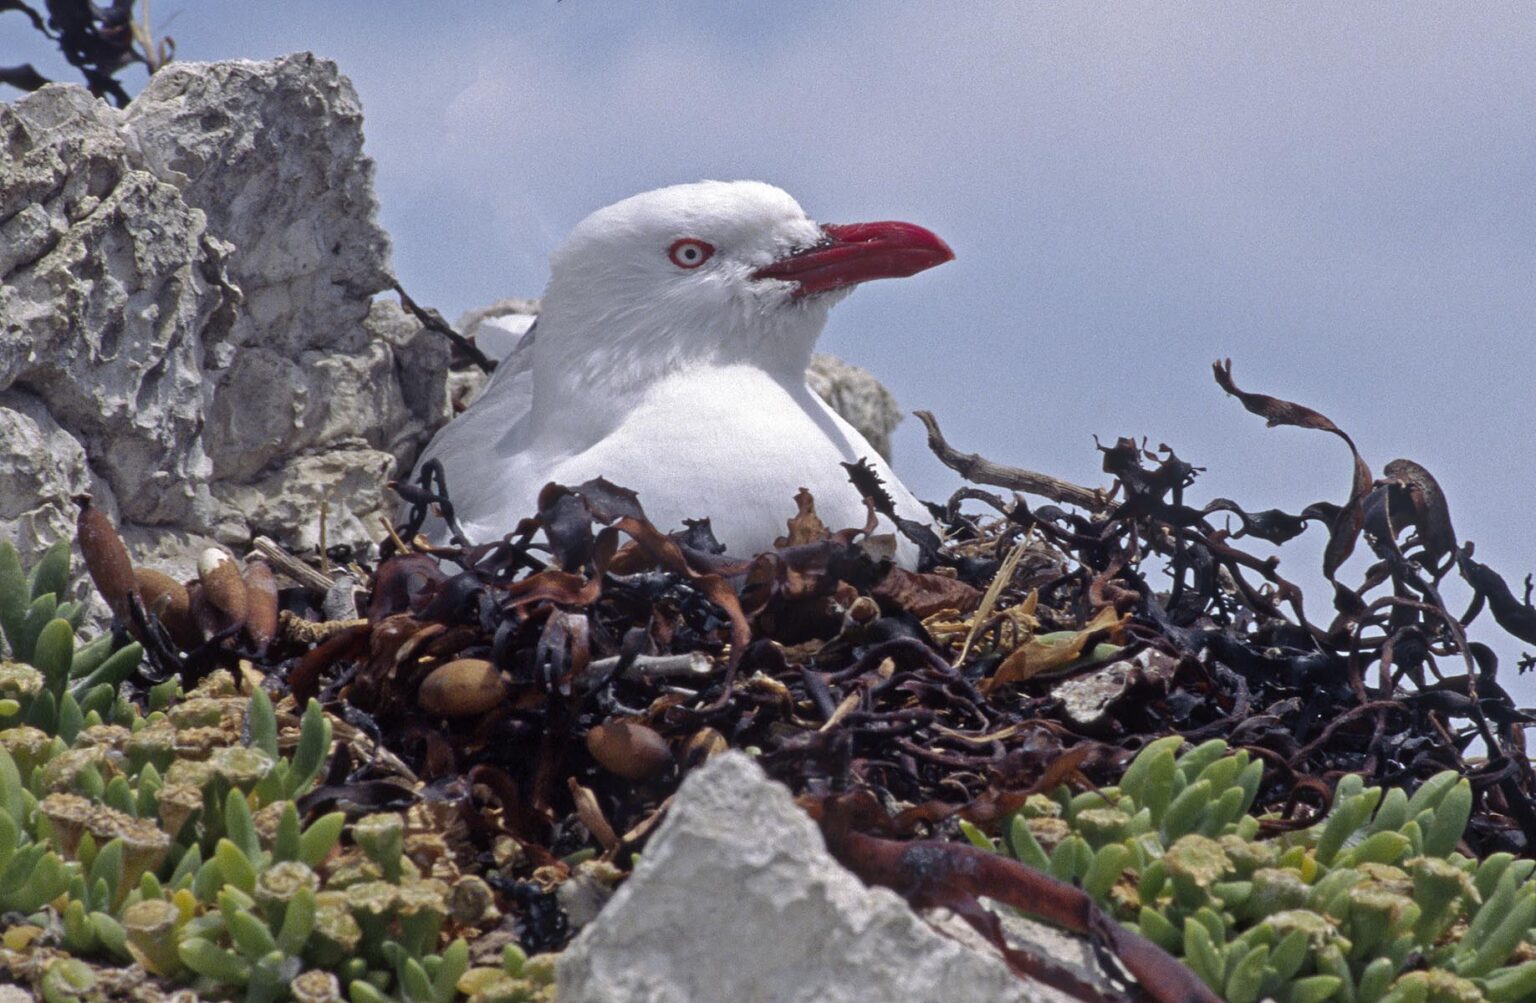 RED BILLED GULL nests along the KAIKOURA coast - SOUTH ISLAND, NEW ZEALAND